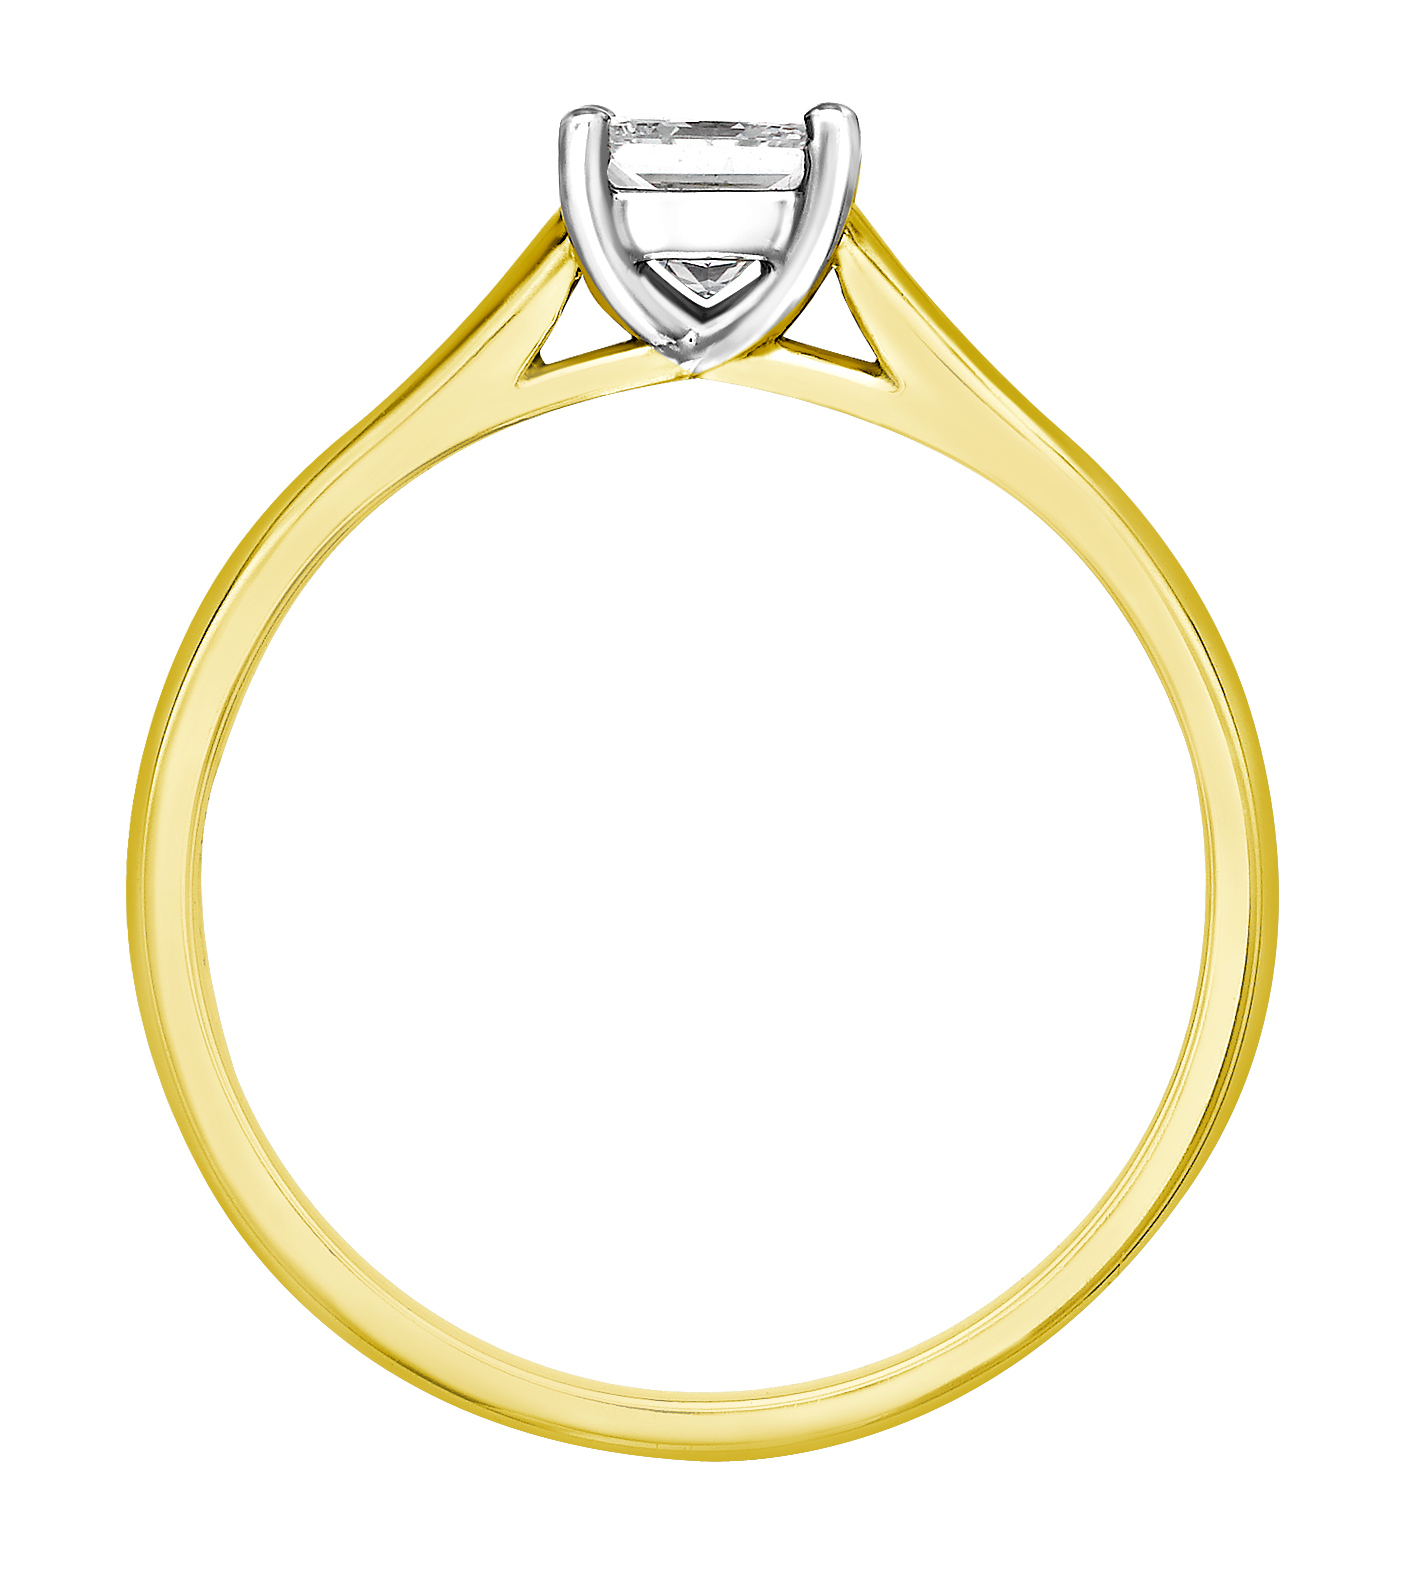 Princess Cut Four Claw Yellow Gold Engagement Ring GRC759YG Image 2